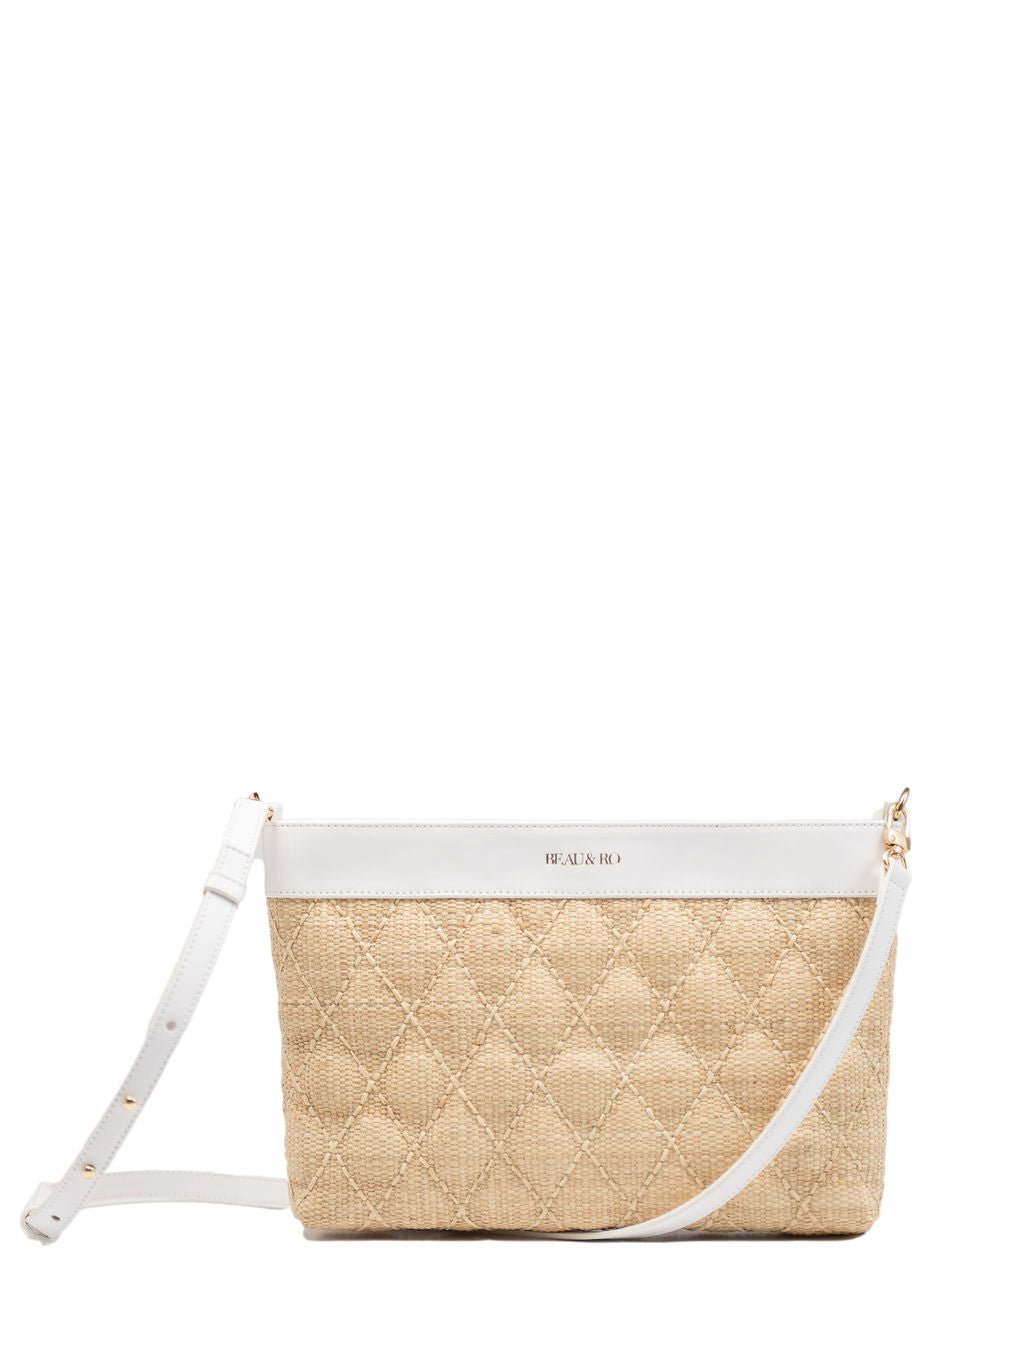 Beau & Ro Clutches White / OS The Maroc Collection Quilted Purse in White